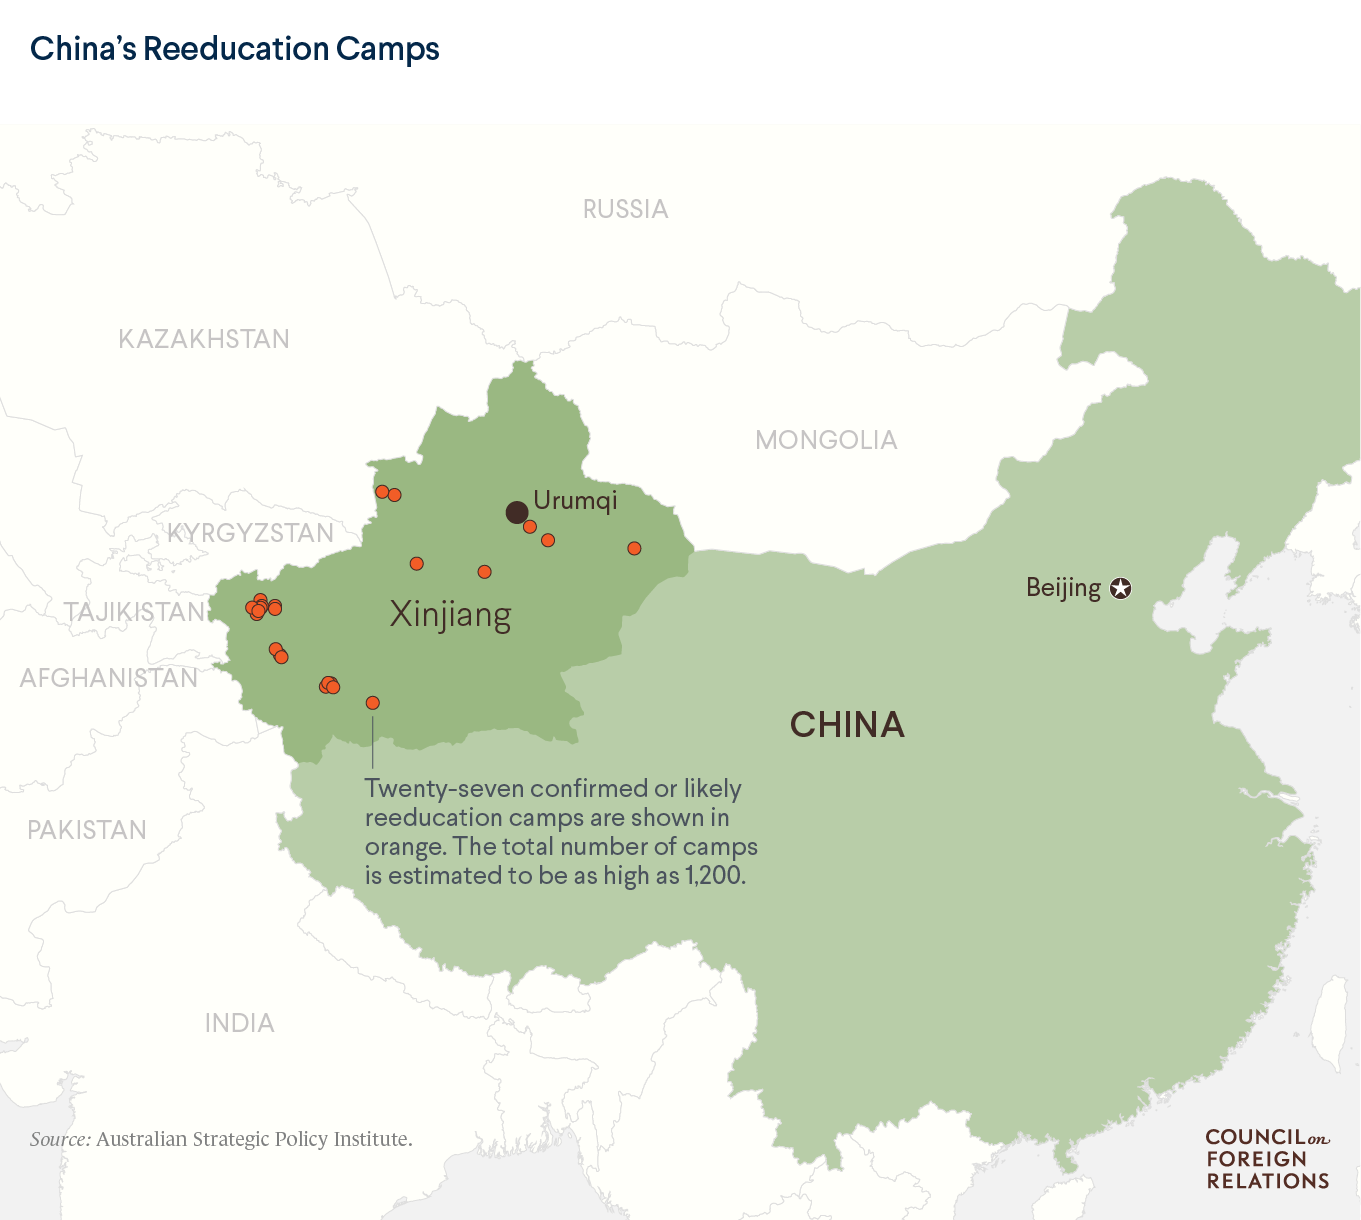 A map showing 27 reeducation camps in China's northwestern province of Xinjiang.